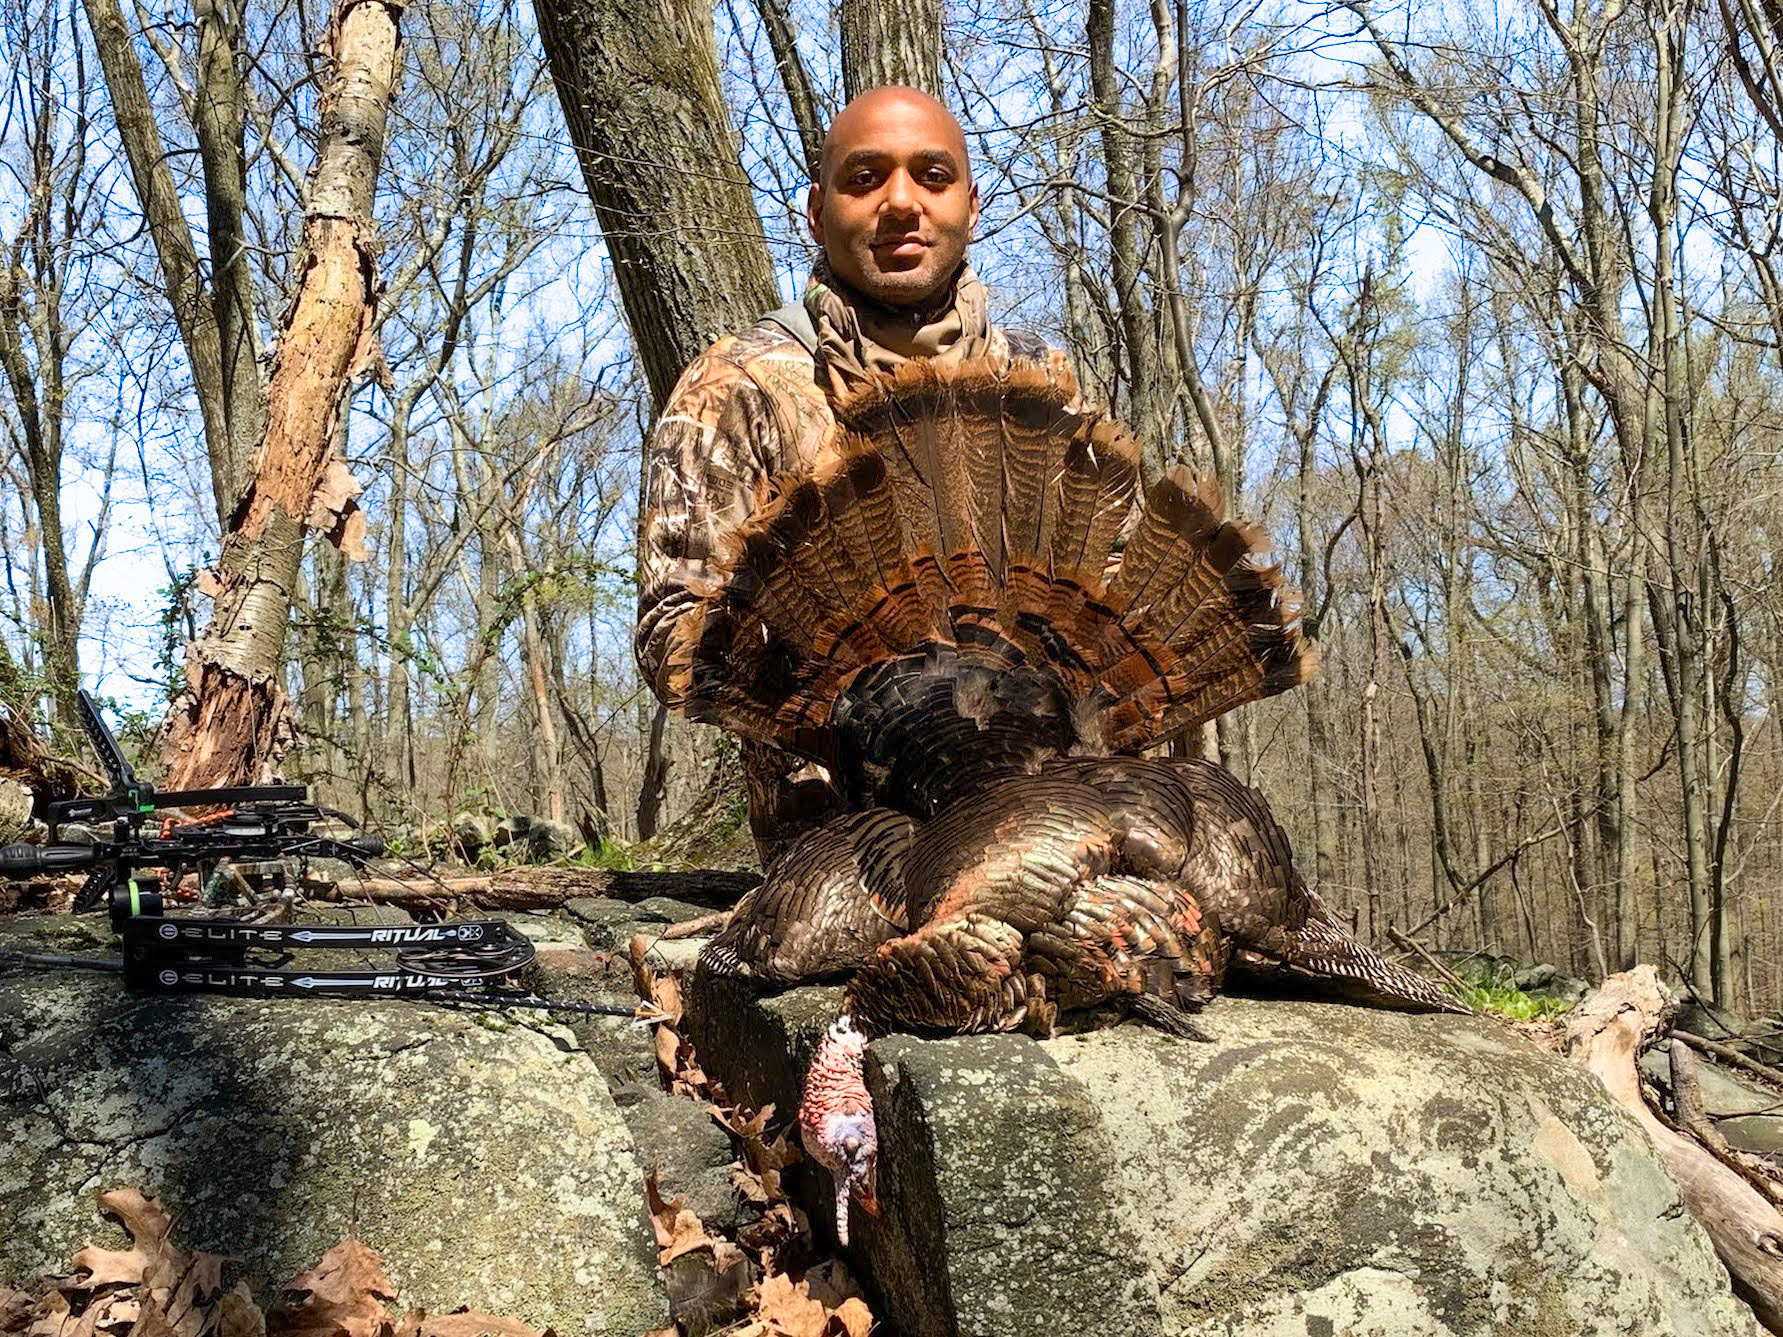 A new hunter with his first turkey.